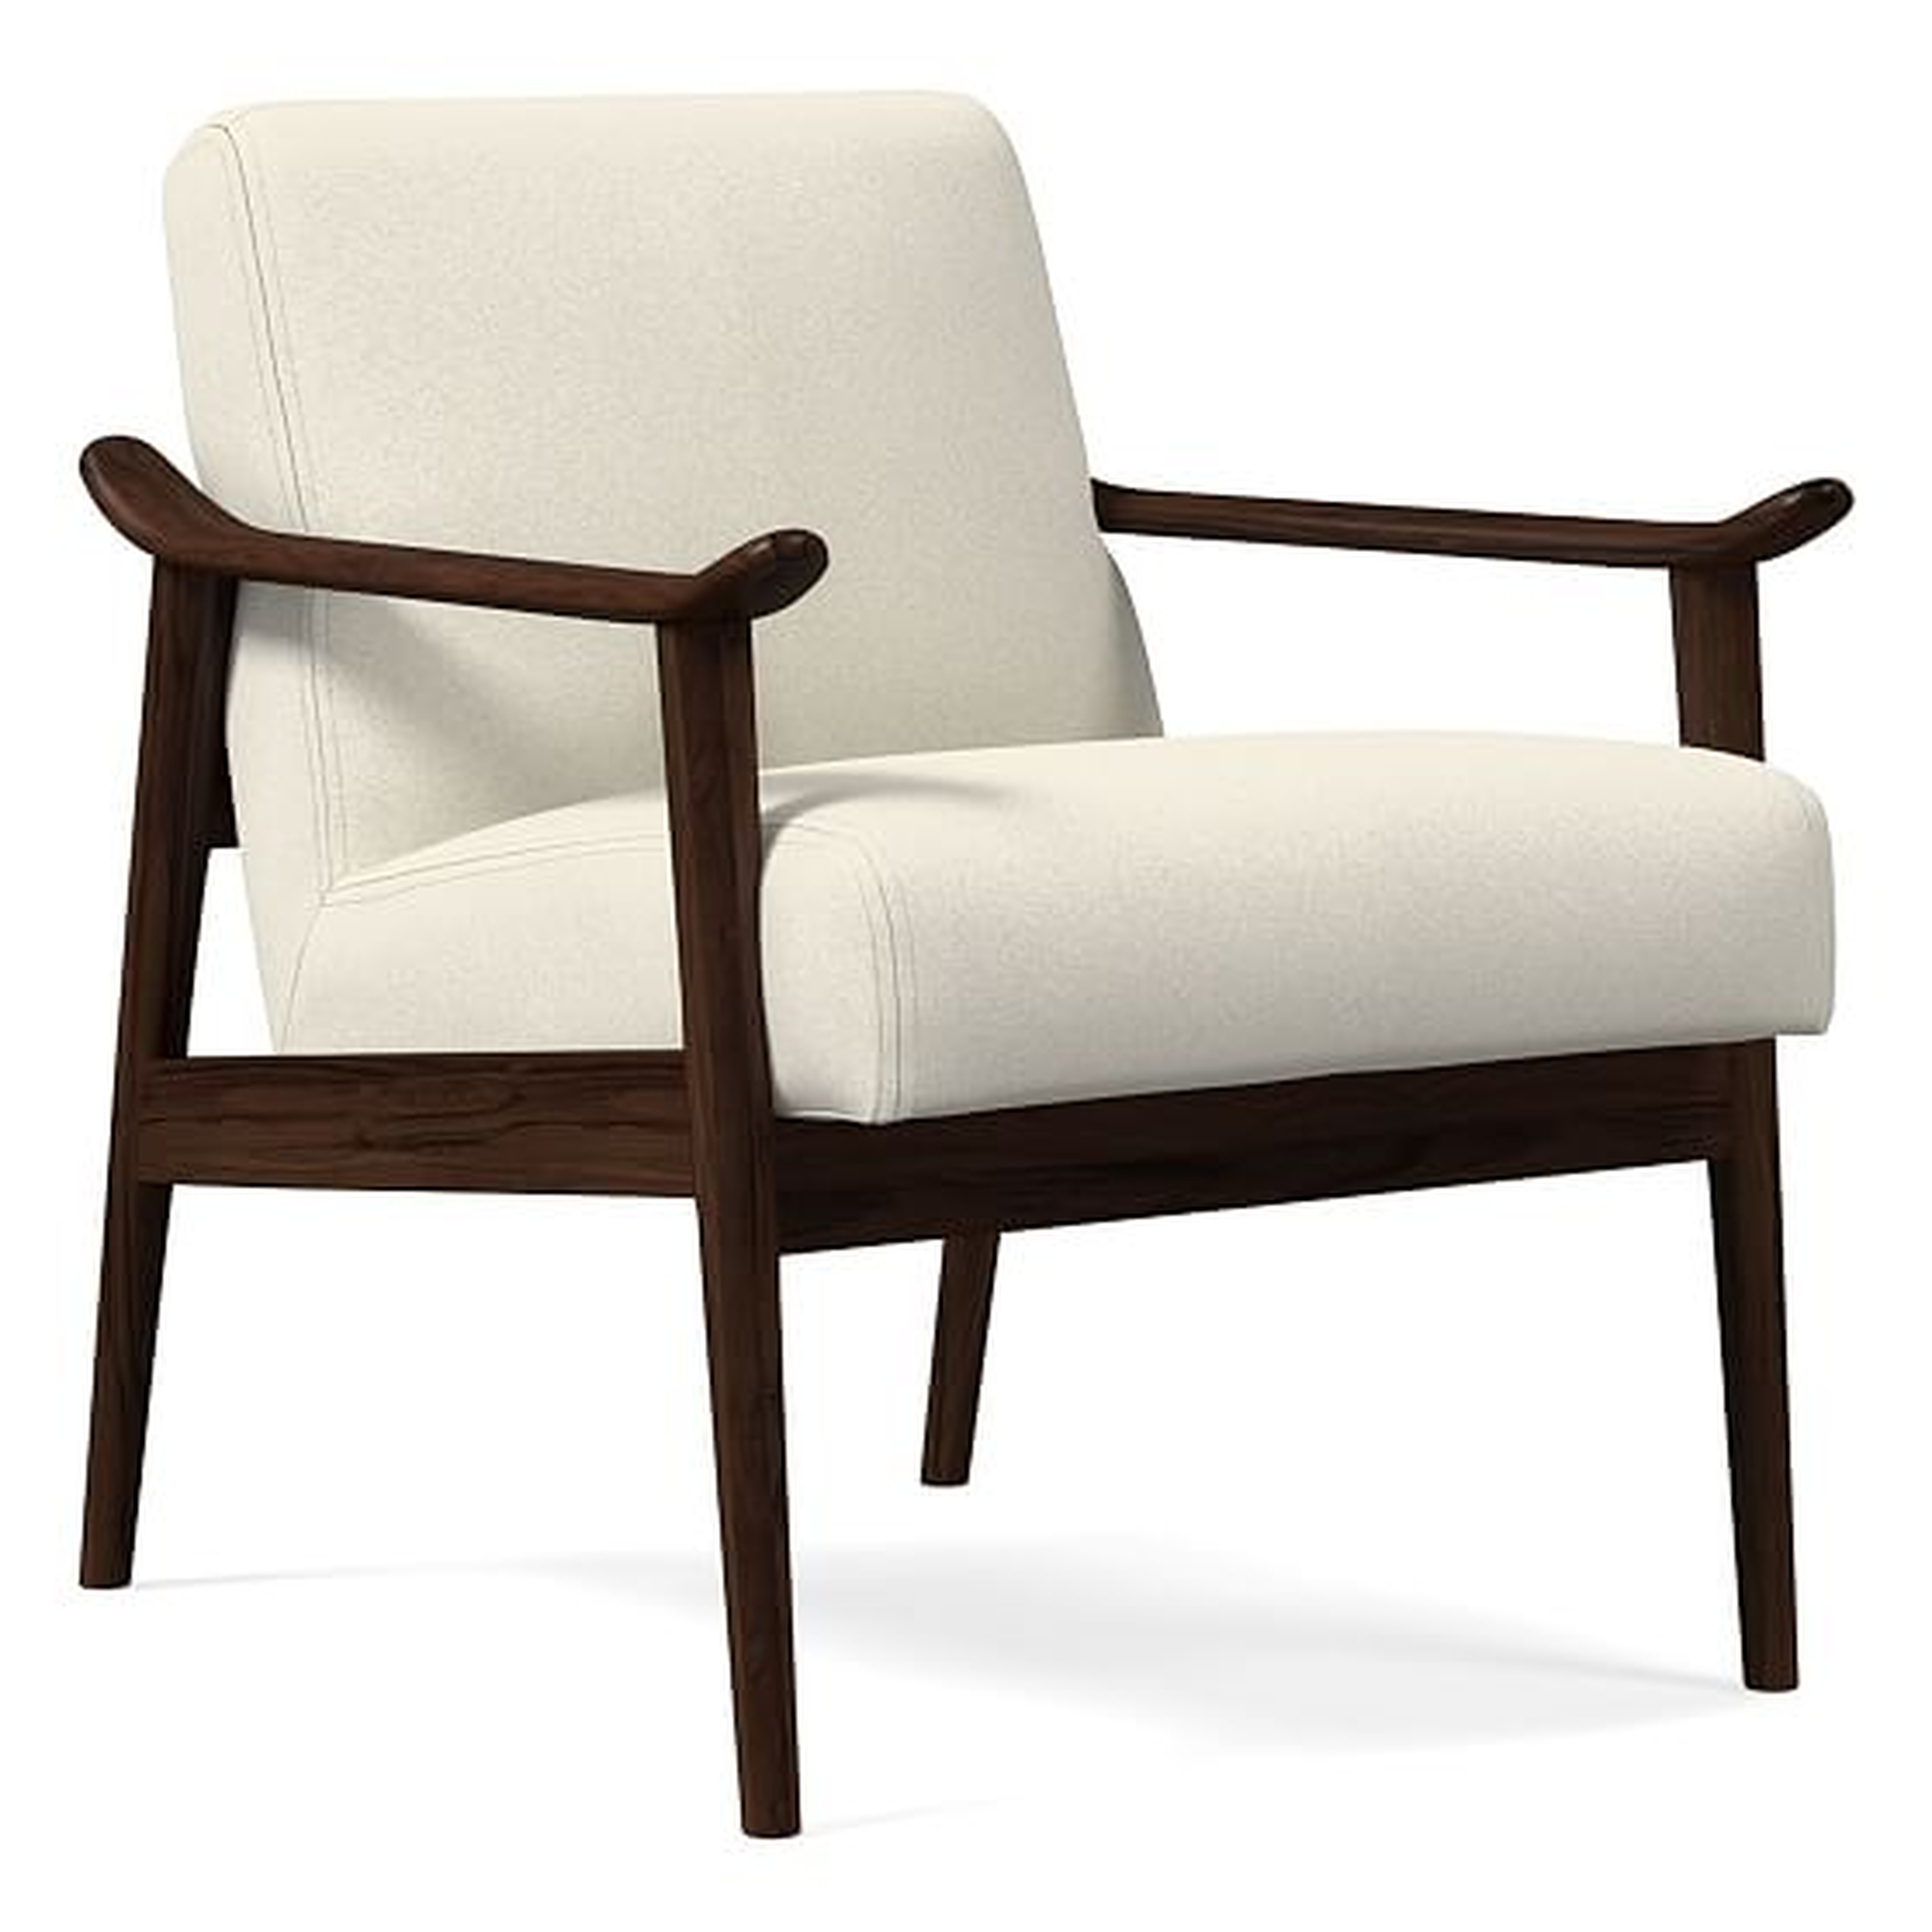 Midcentury Show Wood Chair, Poly, Luxe Boucle, Stone White, Espresso - West Elm